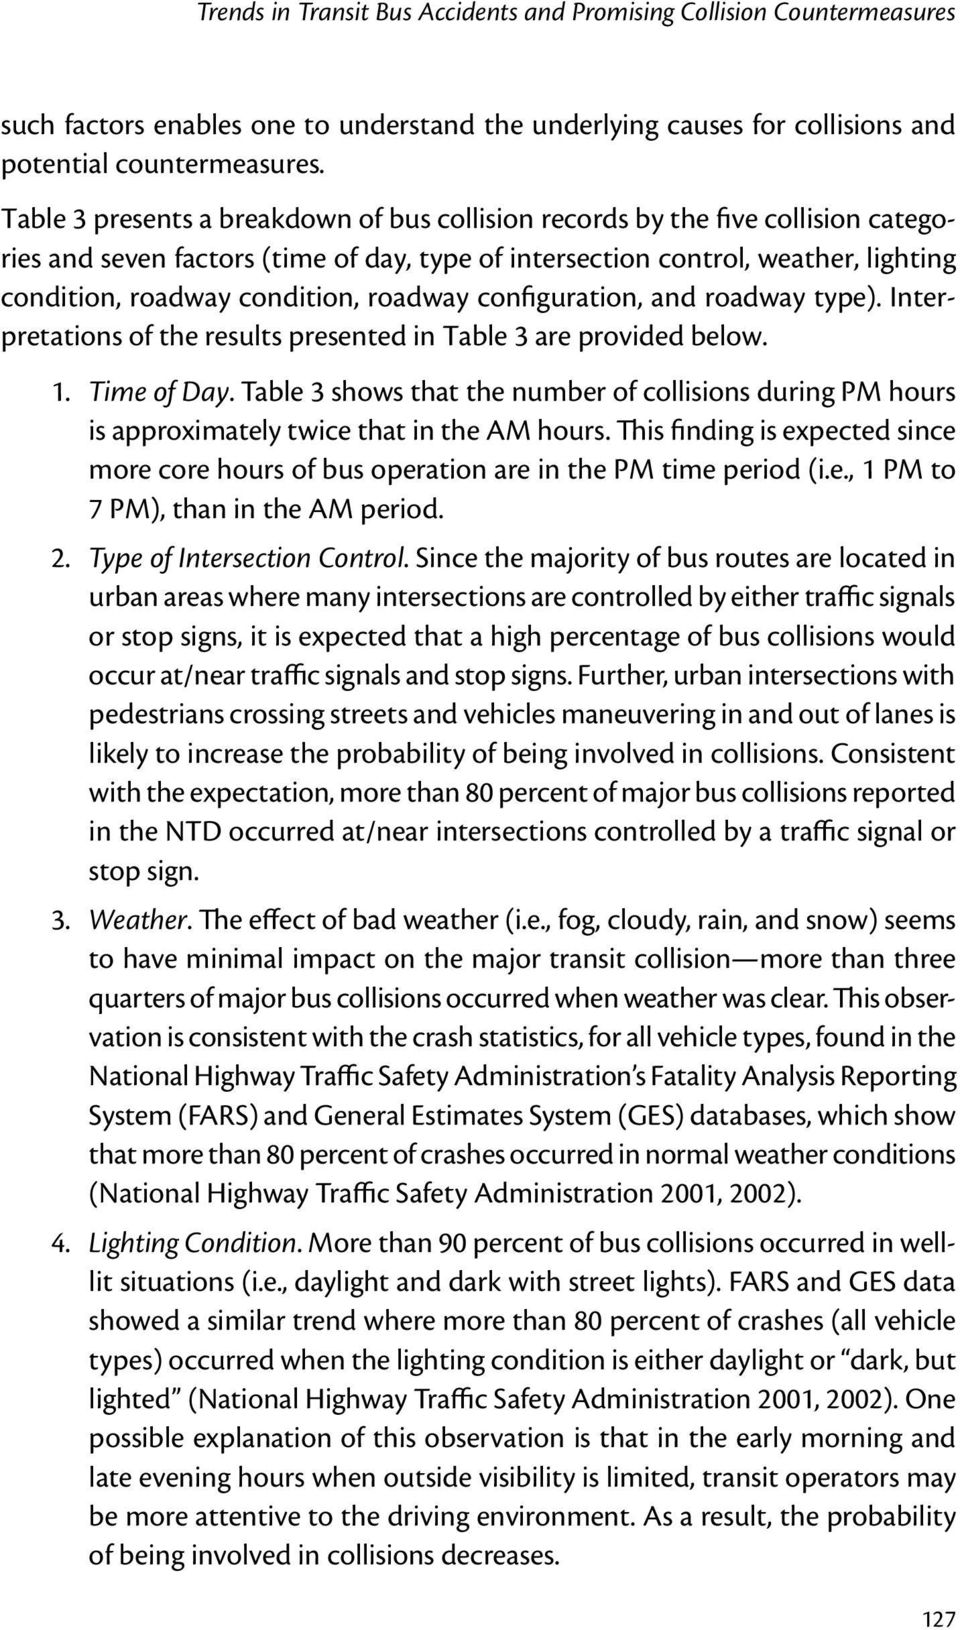 roadway configuration, and roadway type). Interpretations of the results presented in Table 3 are provided below. 1. Time of Day.